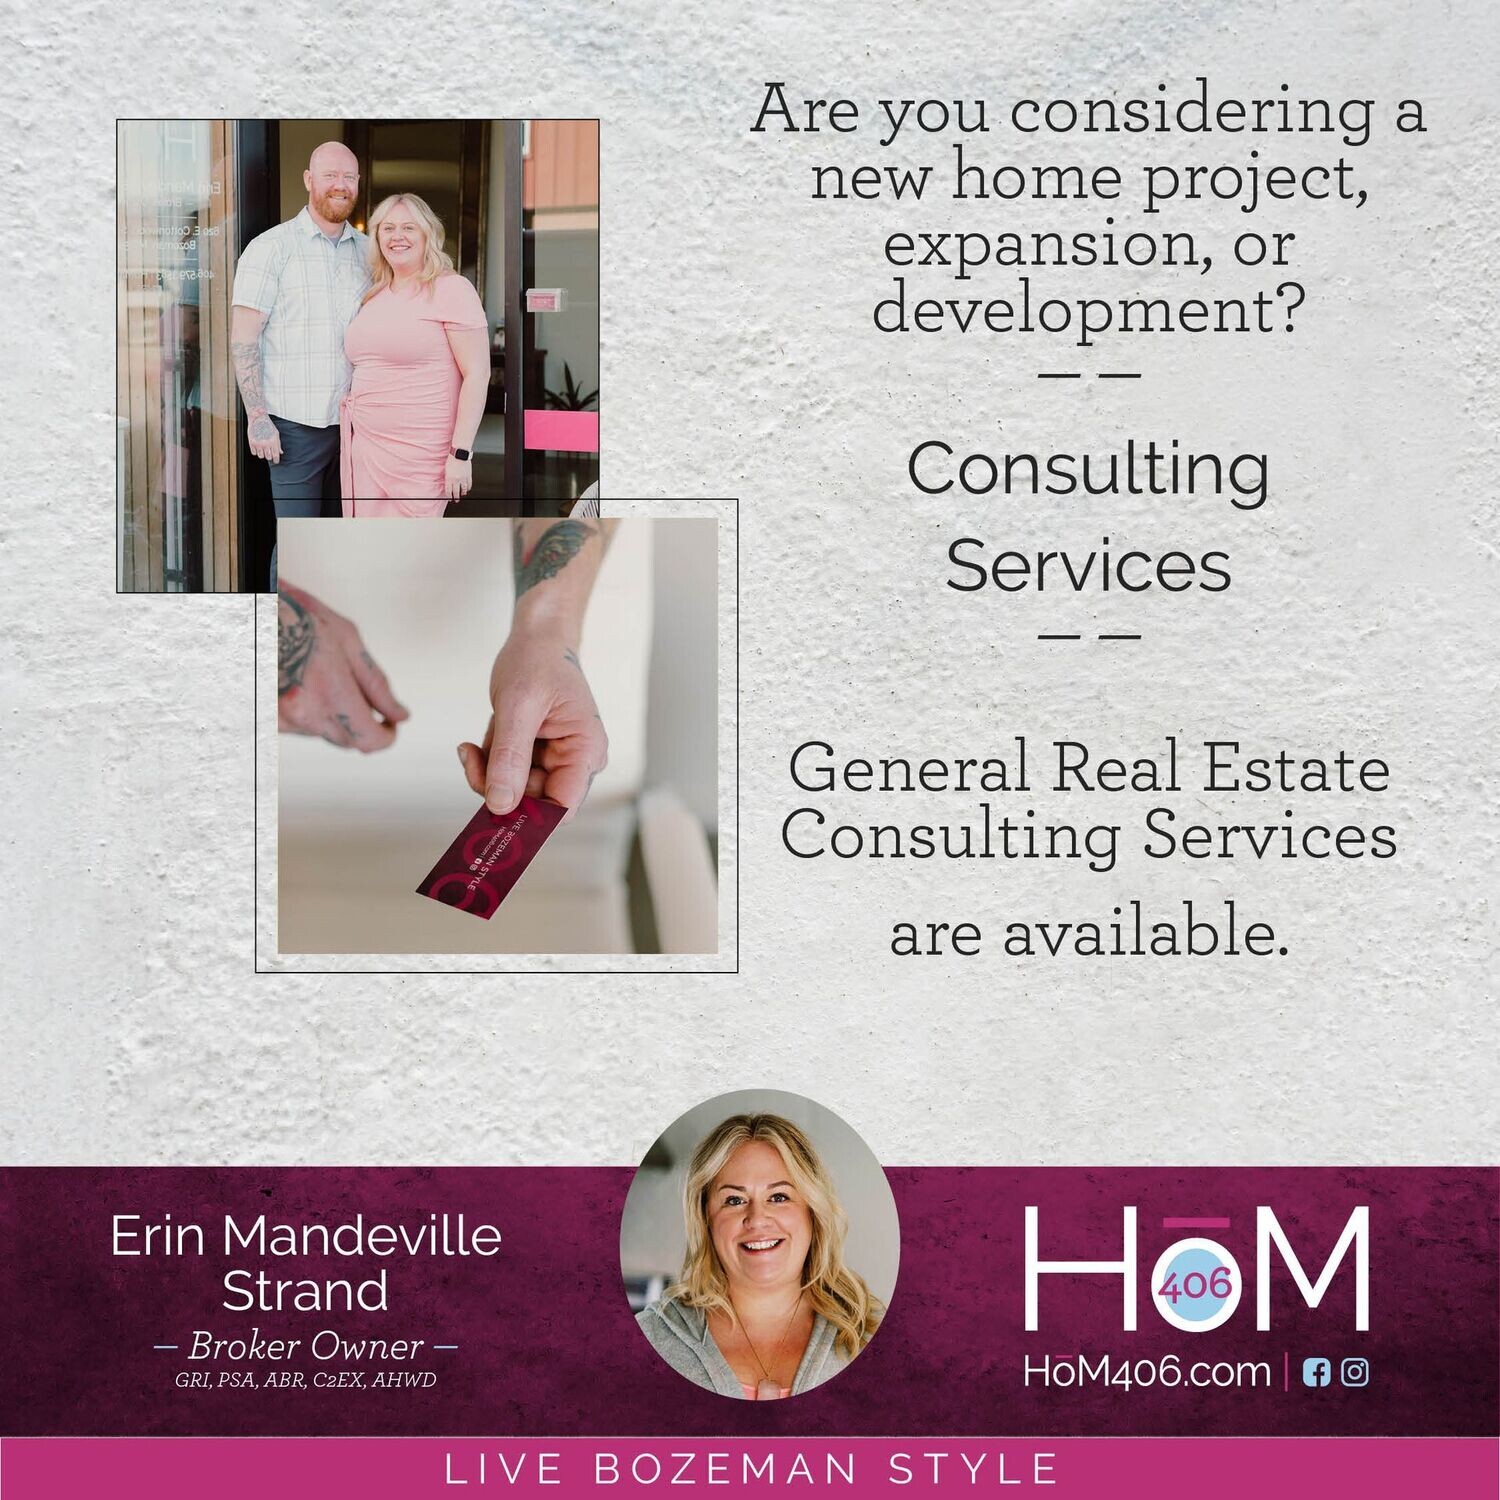 General Real Estate Consulting